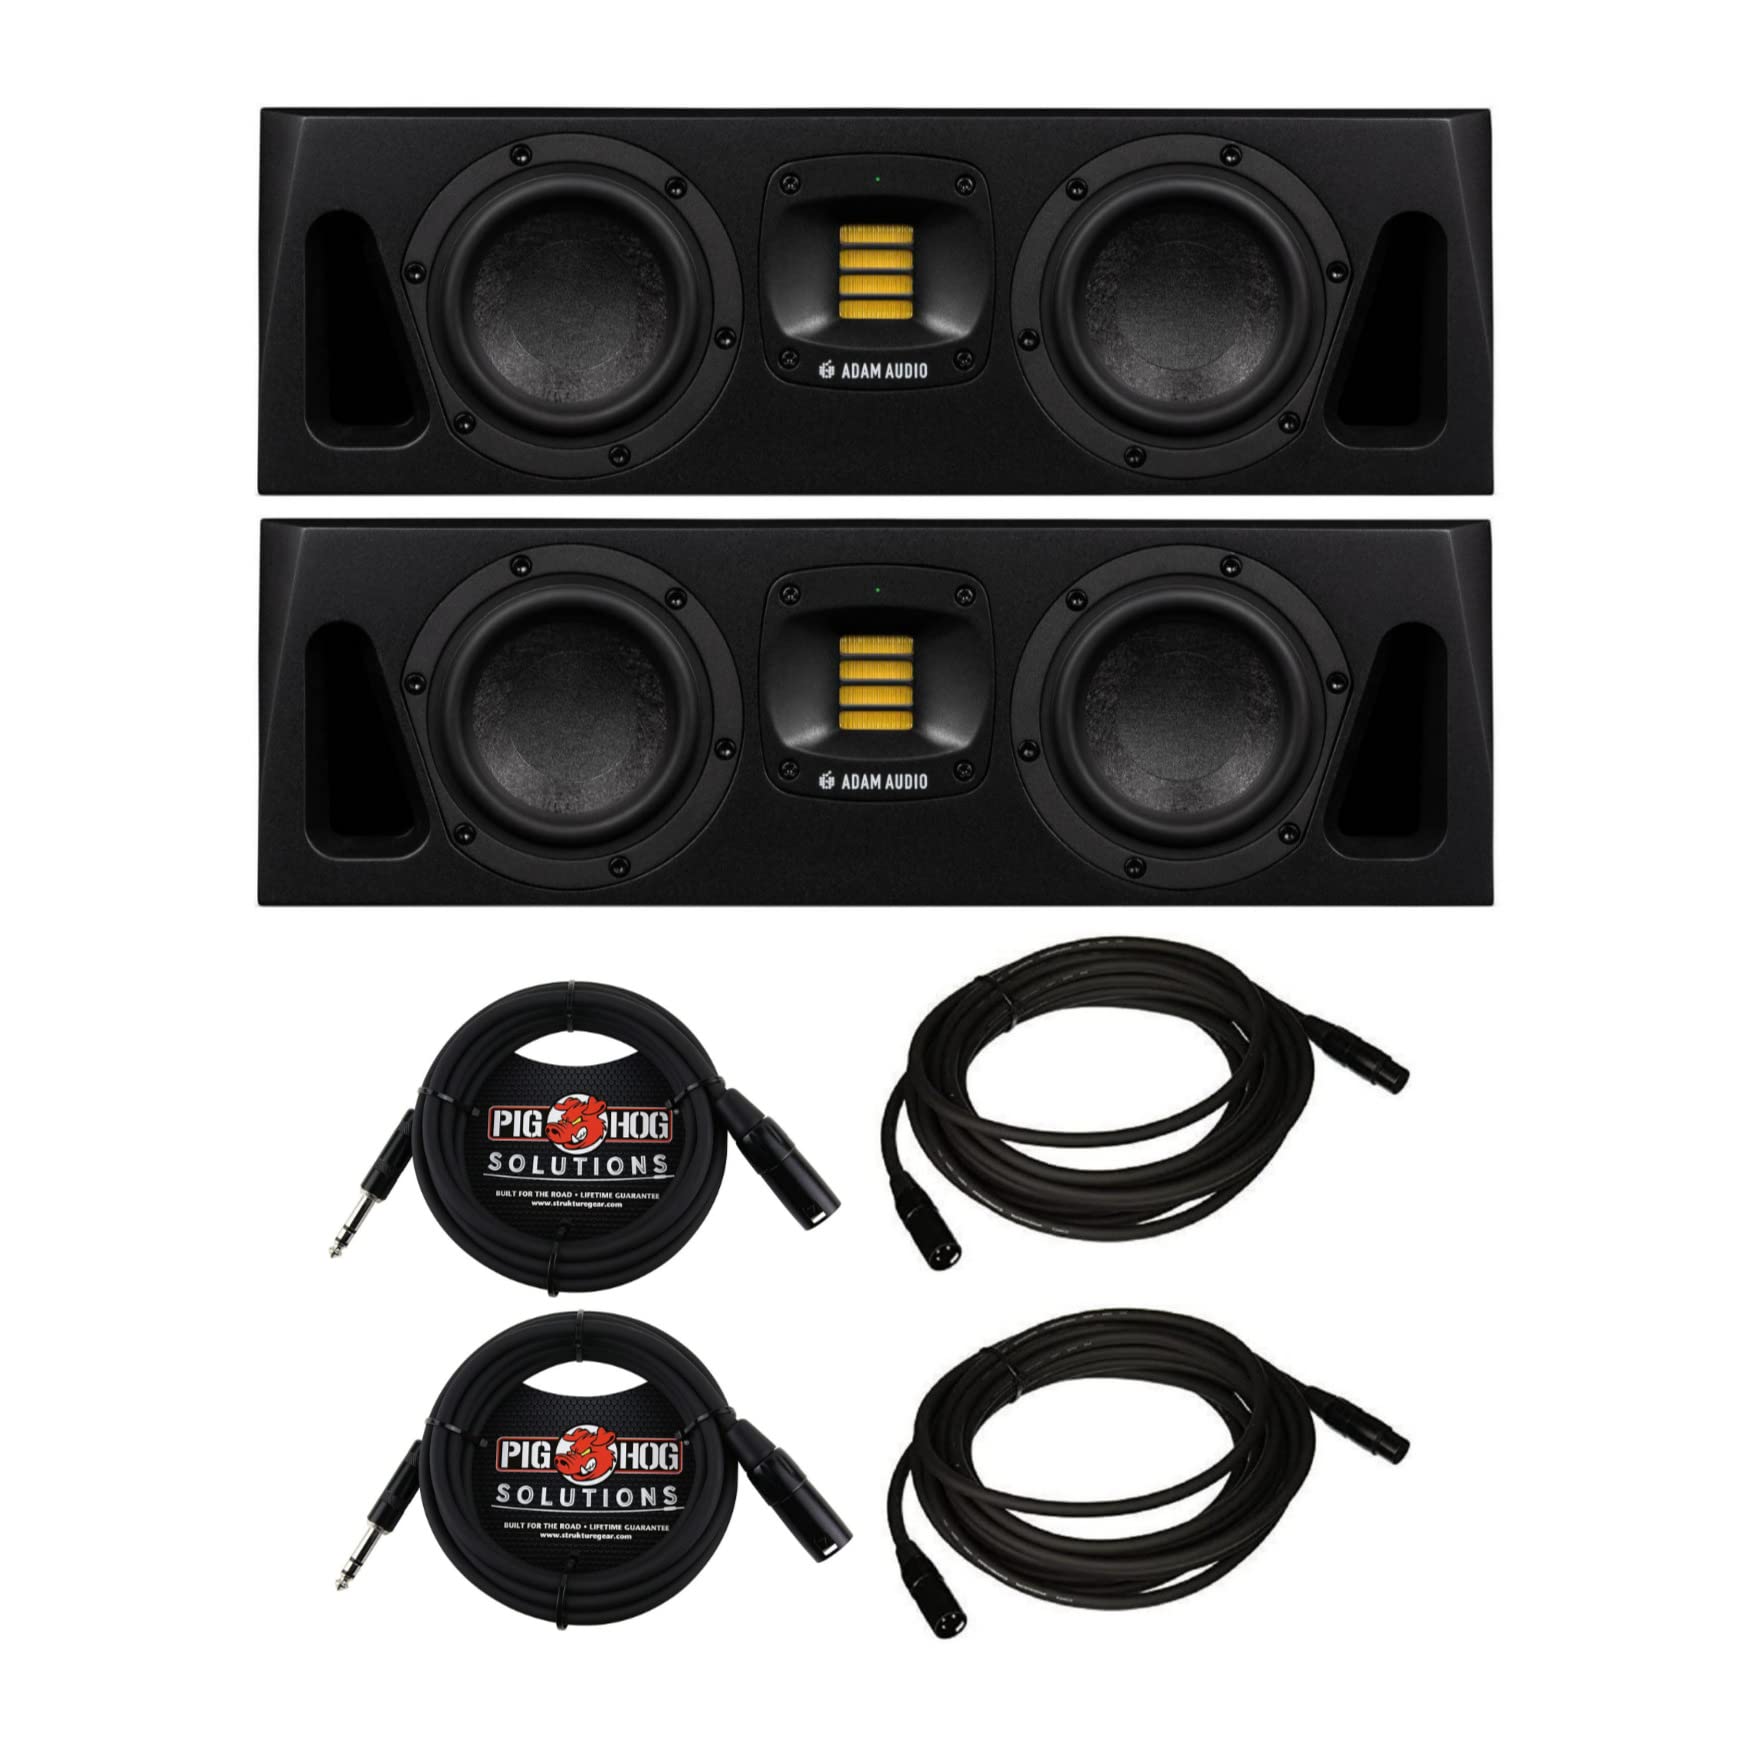 Adam Audio A44H Powered Two-Way Midfield Studio Monitor (2-Pack) Bundle with XLR Cables (2-Pack) and XLR to 1/4-Inch TRS Cables (2-Pack) (6 Items)